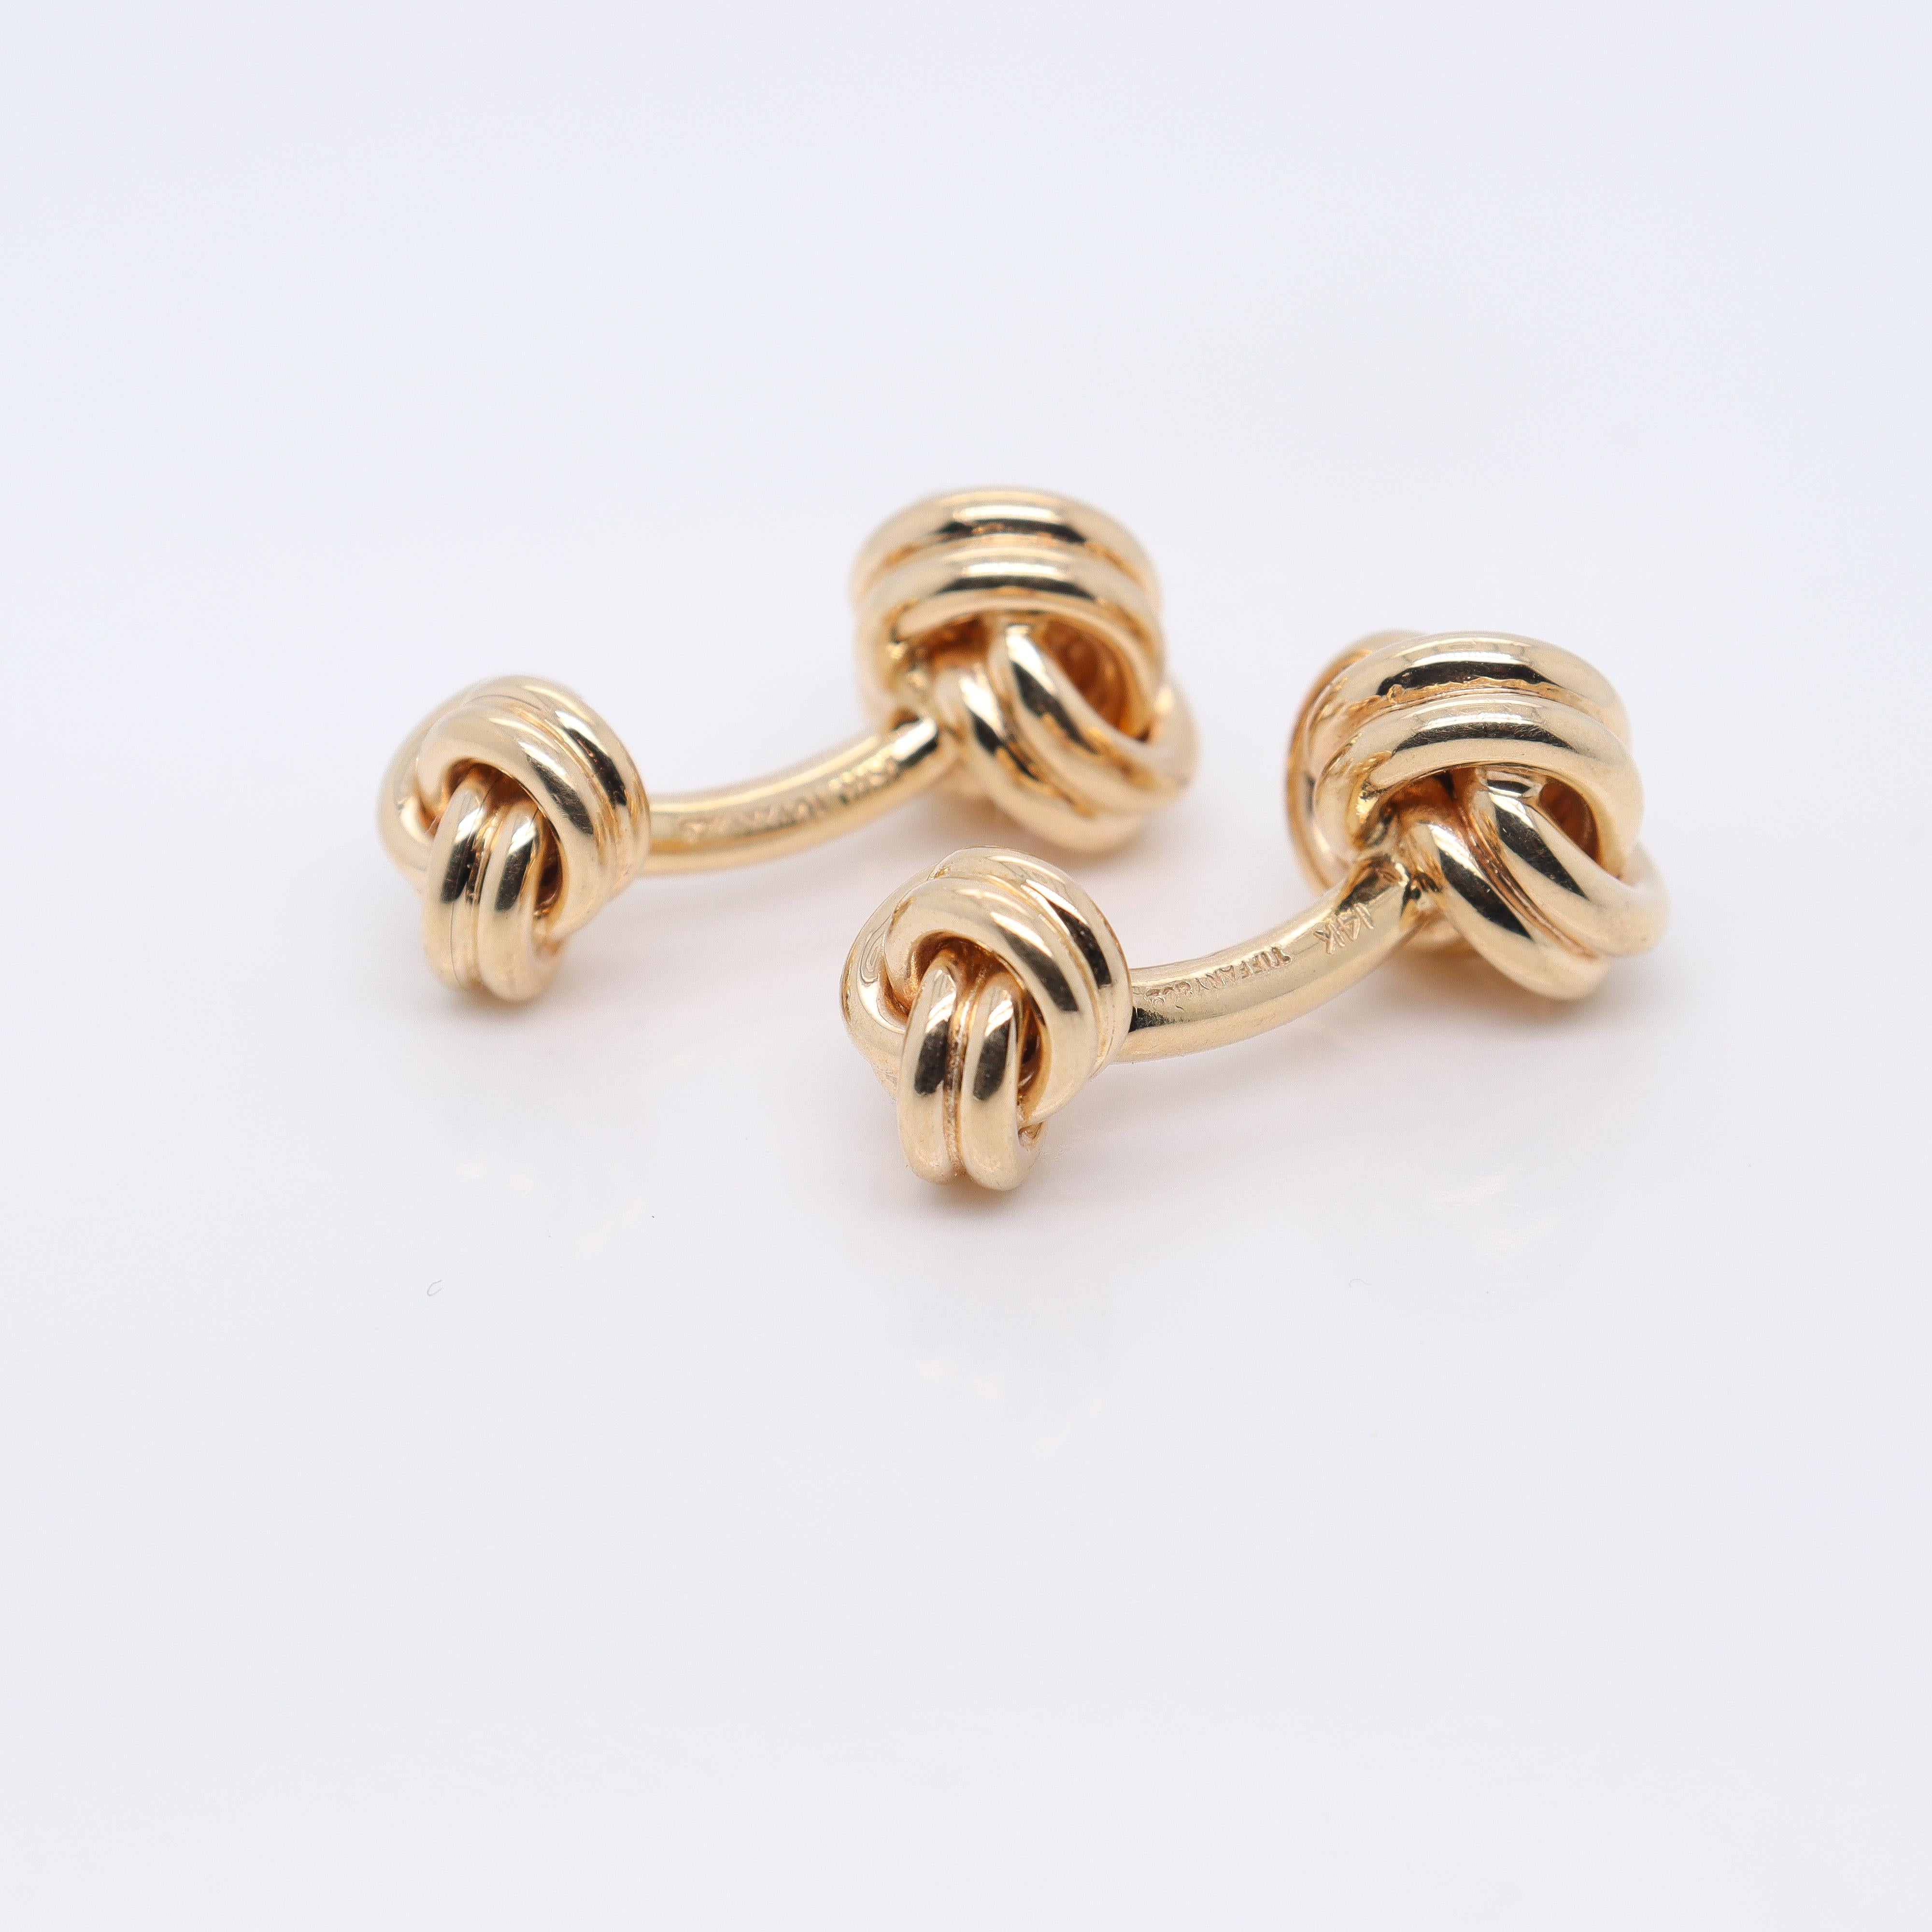 Pair of Tiffany & Co. 14k Gold Double Love Knot Cufflinks 1